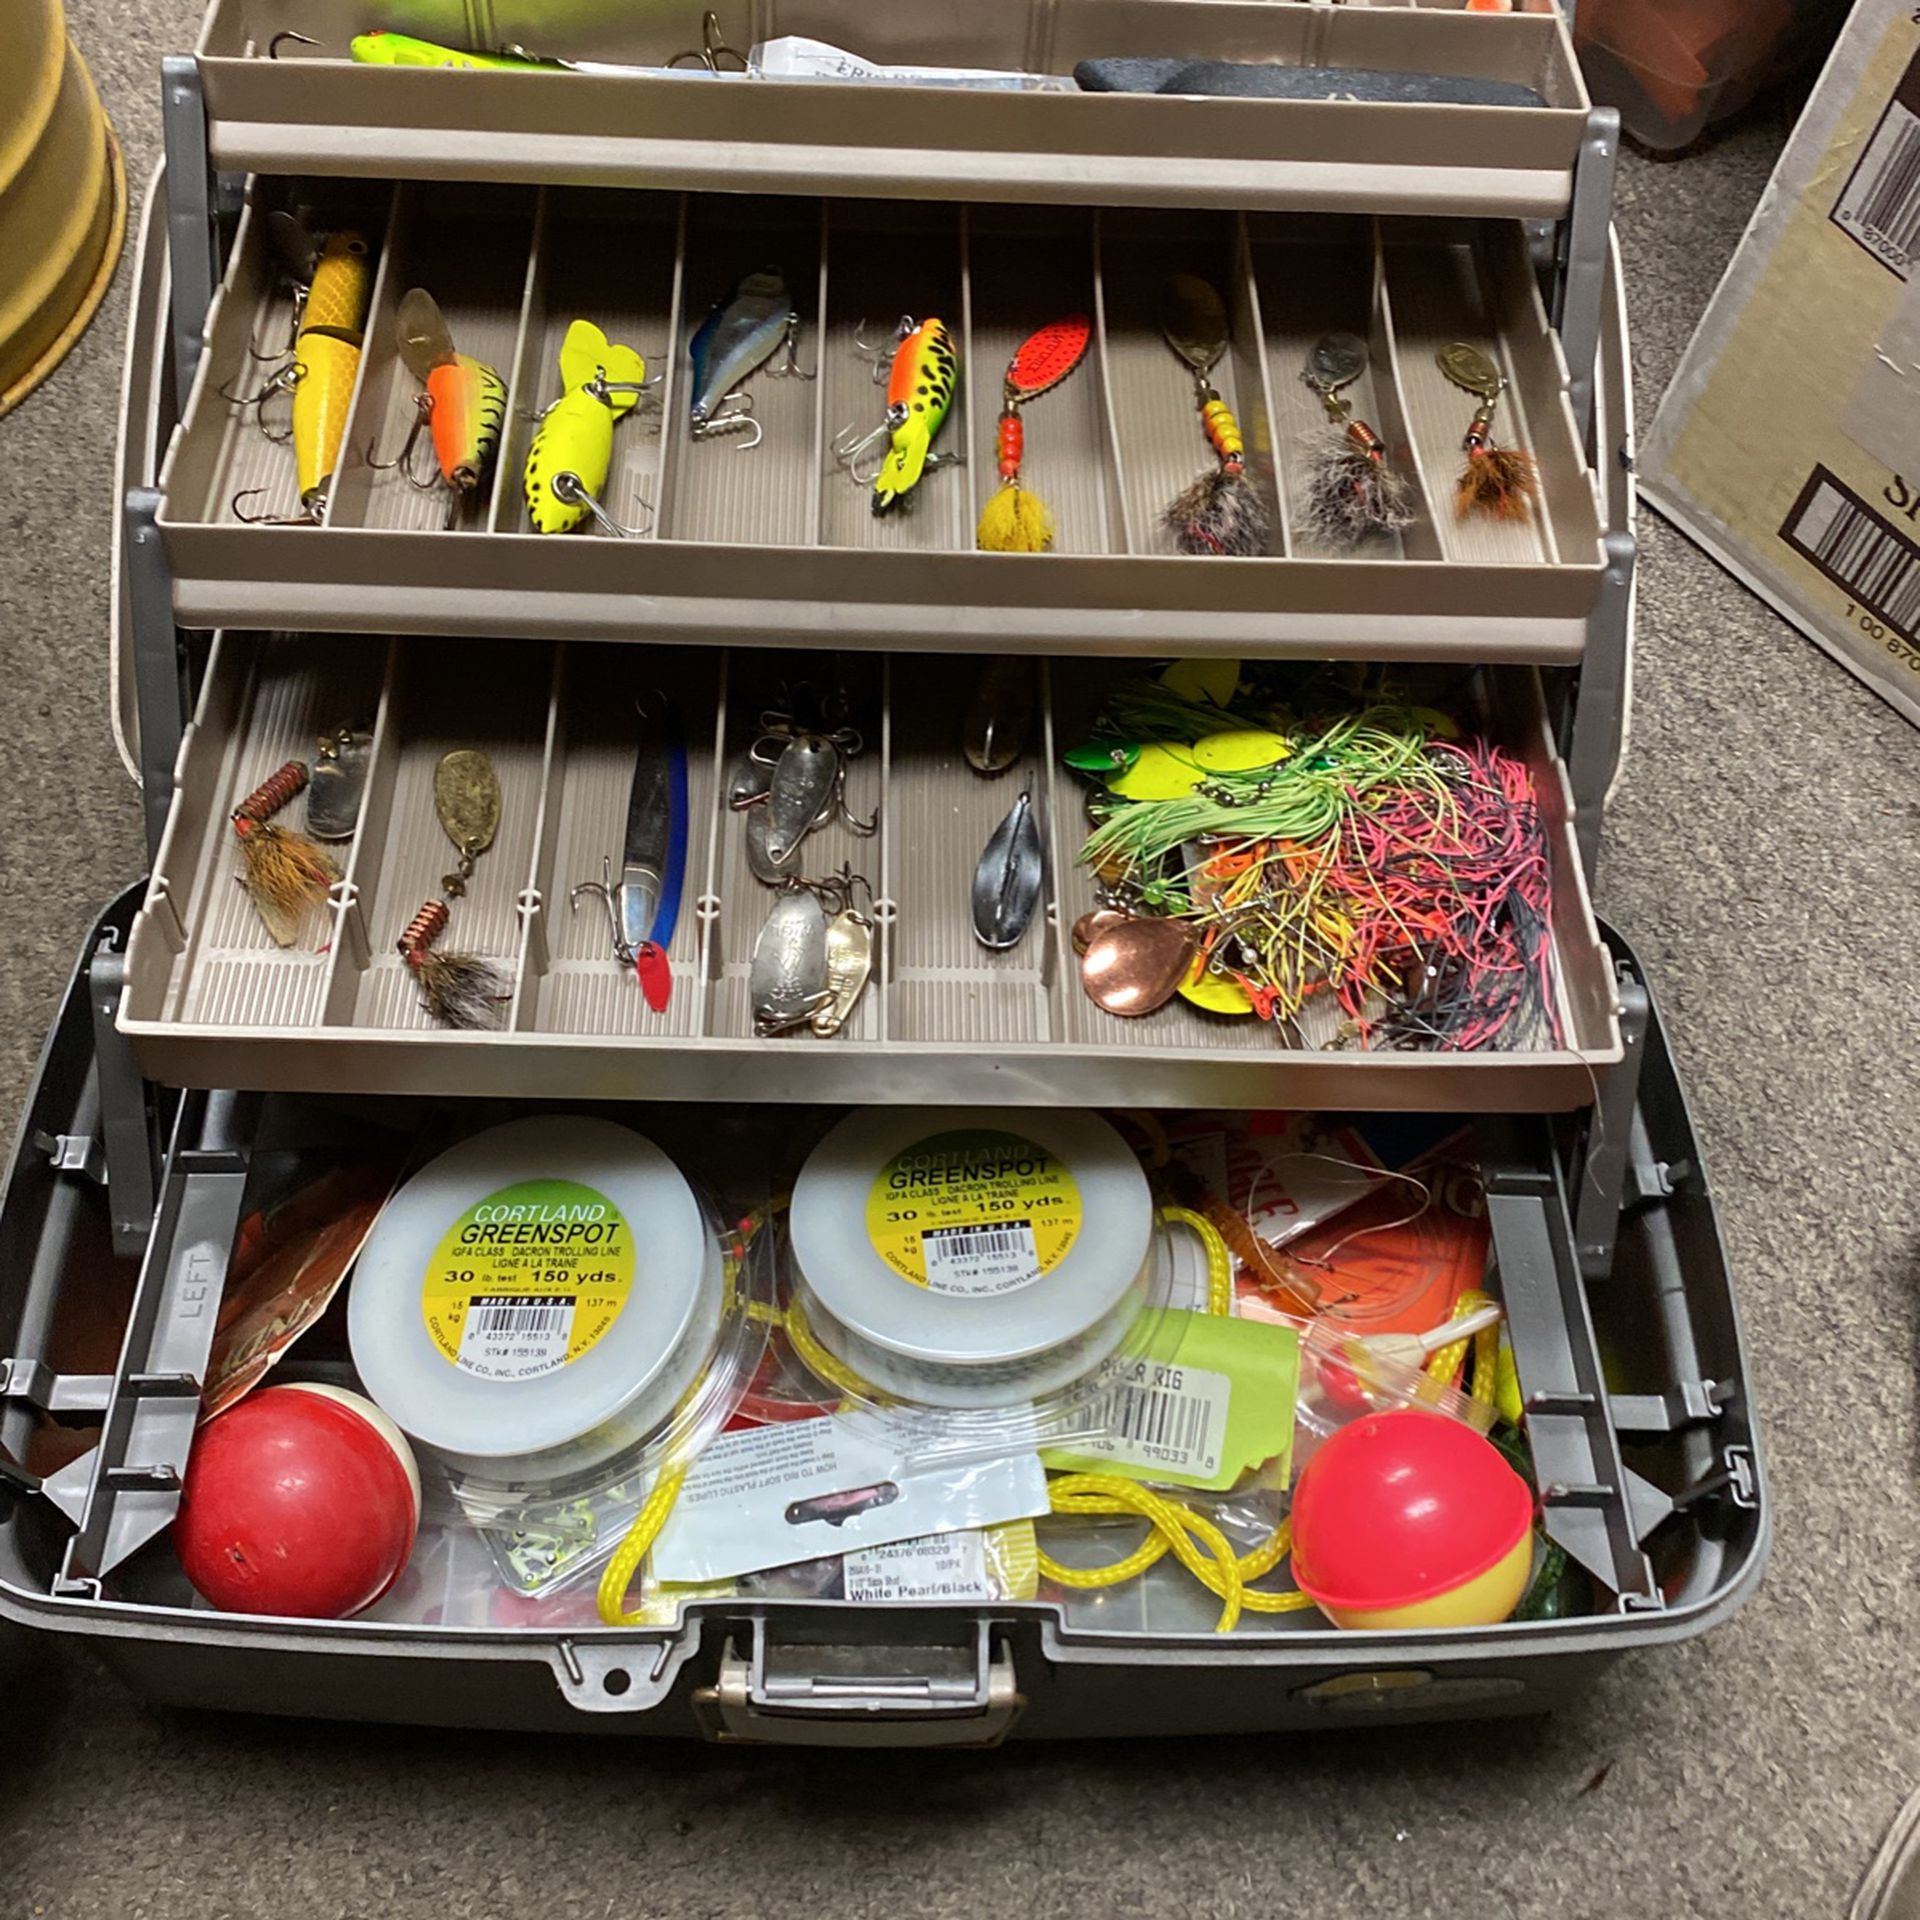 Tackle Box Full Of Tackle. Lures. Line All Kinds Misc Tackle And